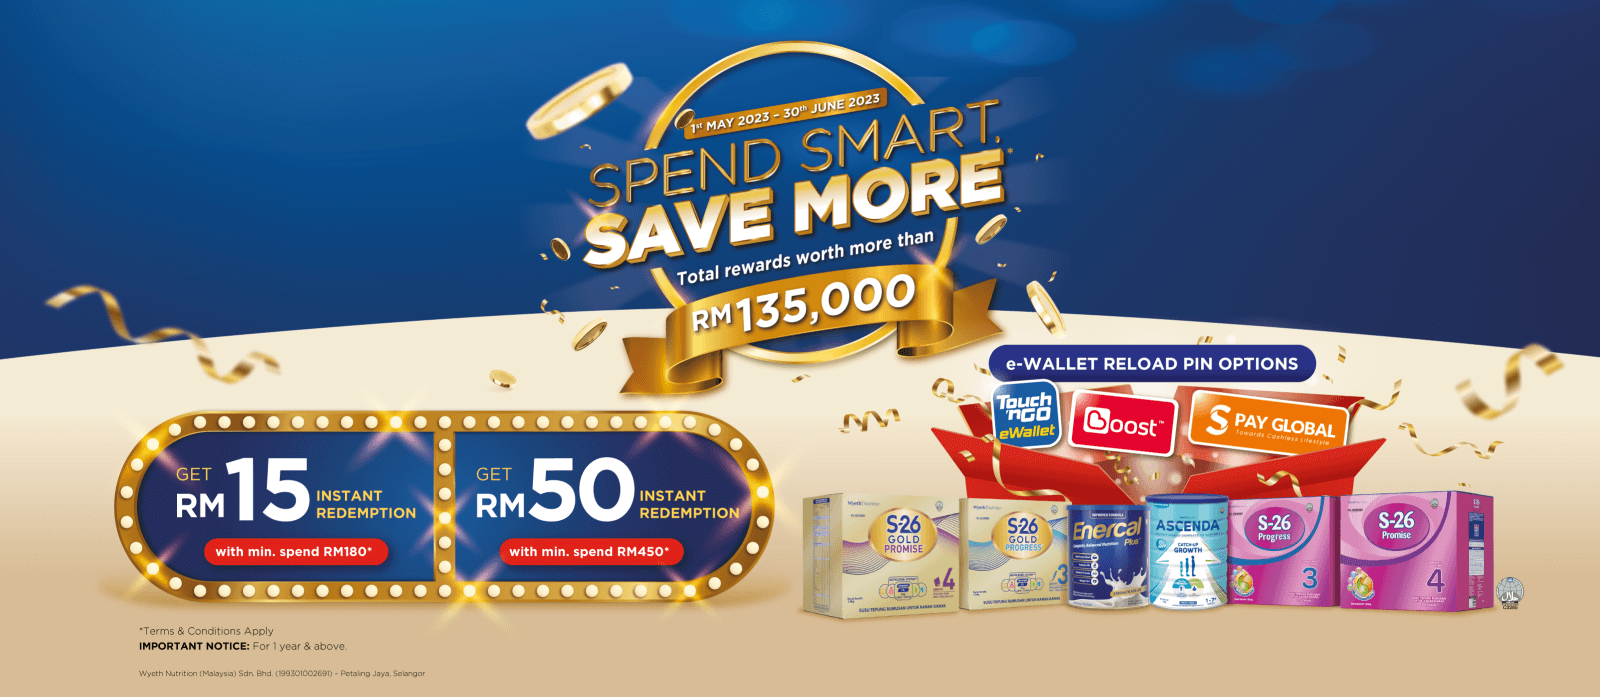 spend-smart-save-more-banner